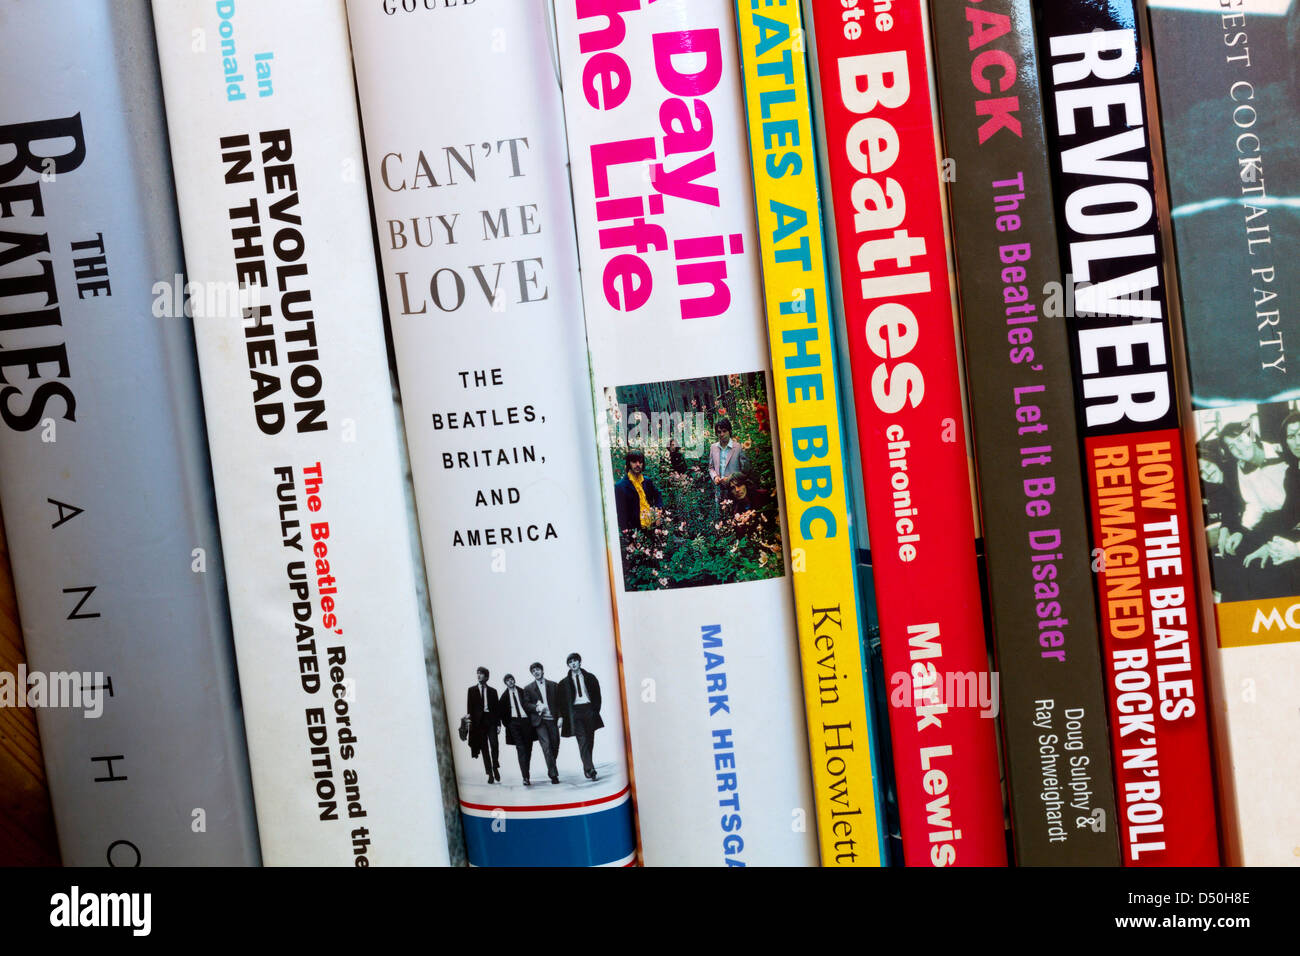 Close up view of books about The Beatles published in recent years showing continuing interest in the 1960s pop group Stock Photo